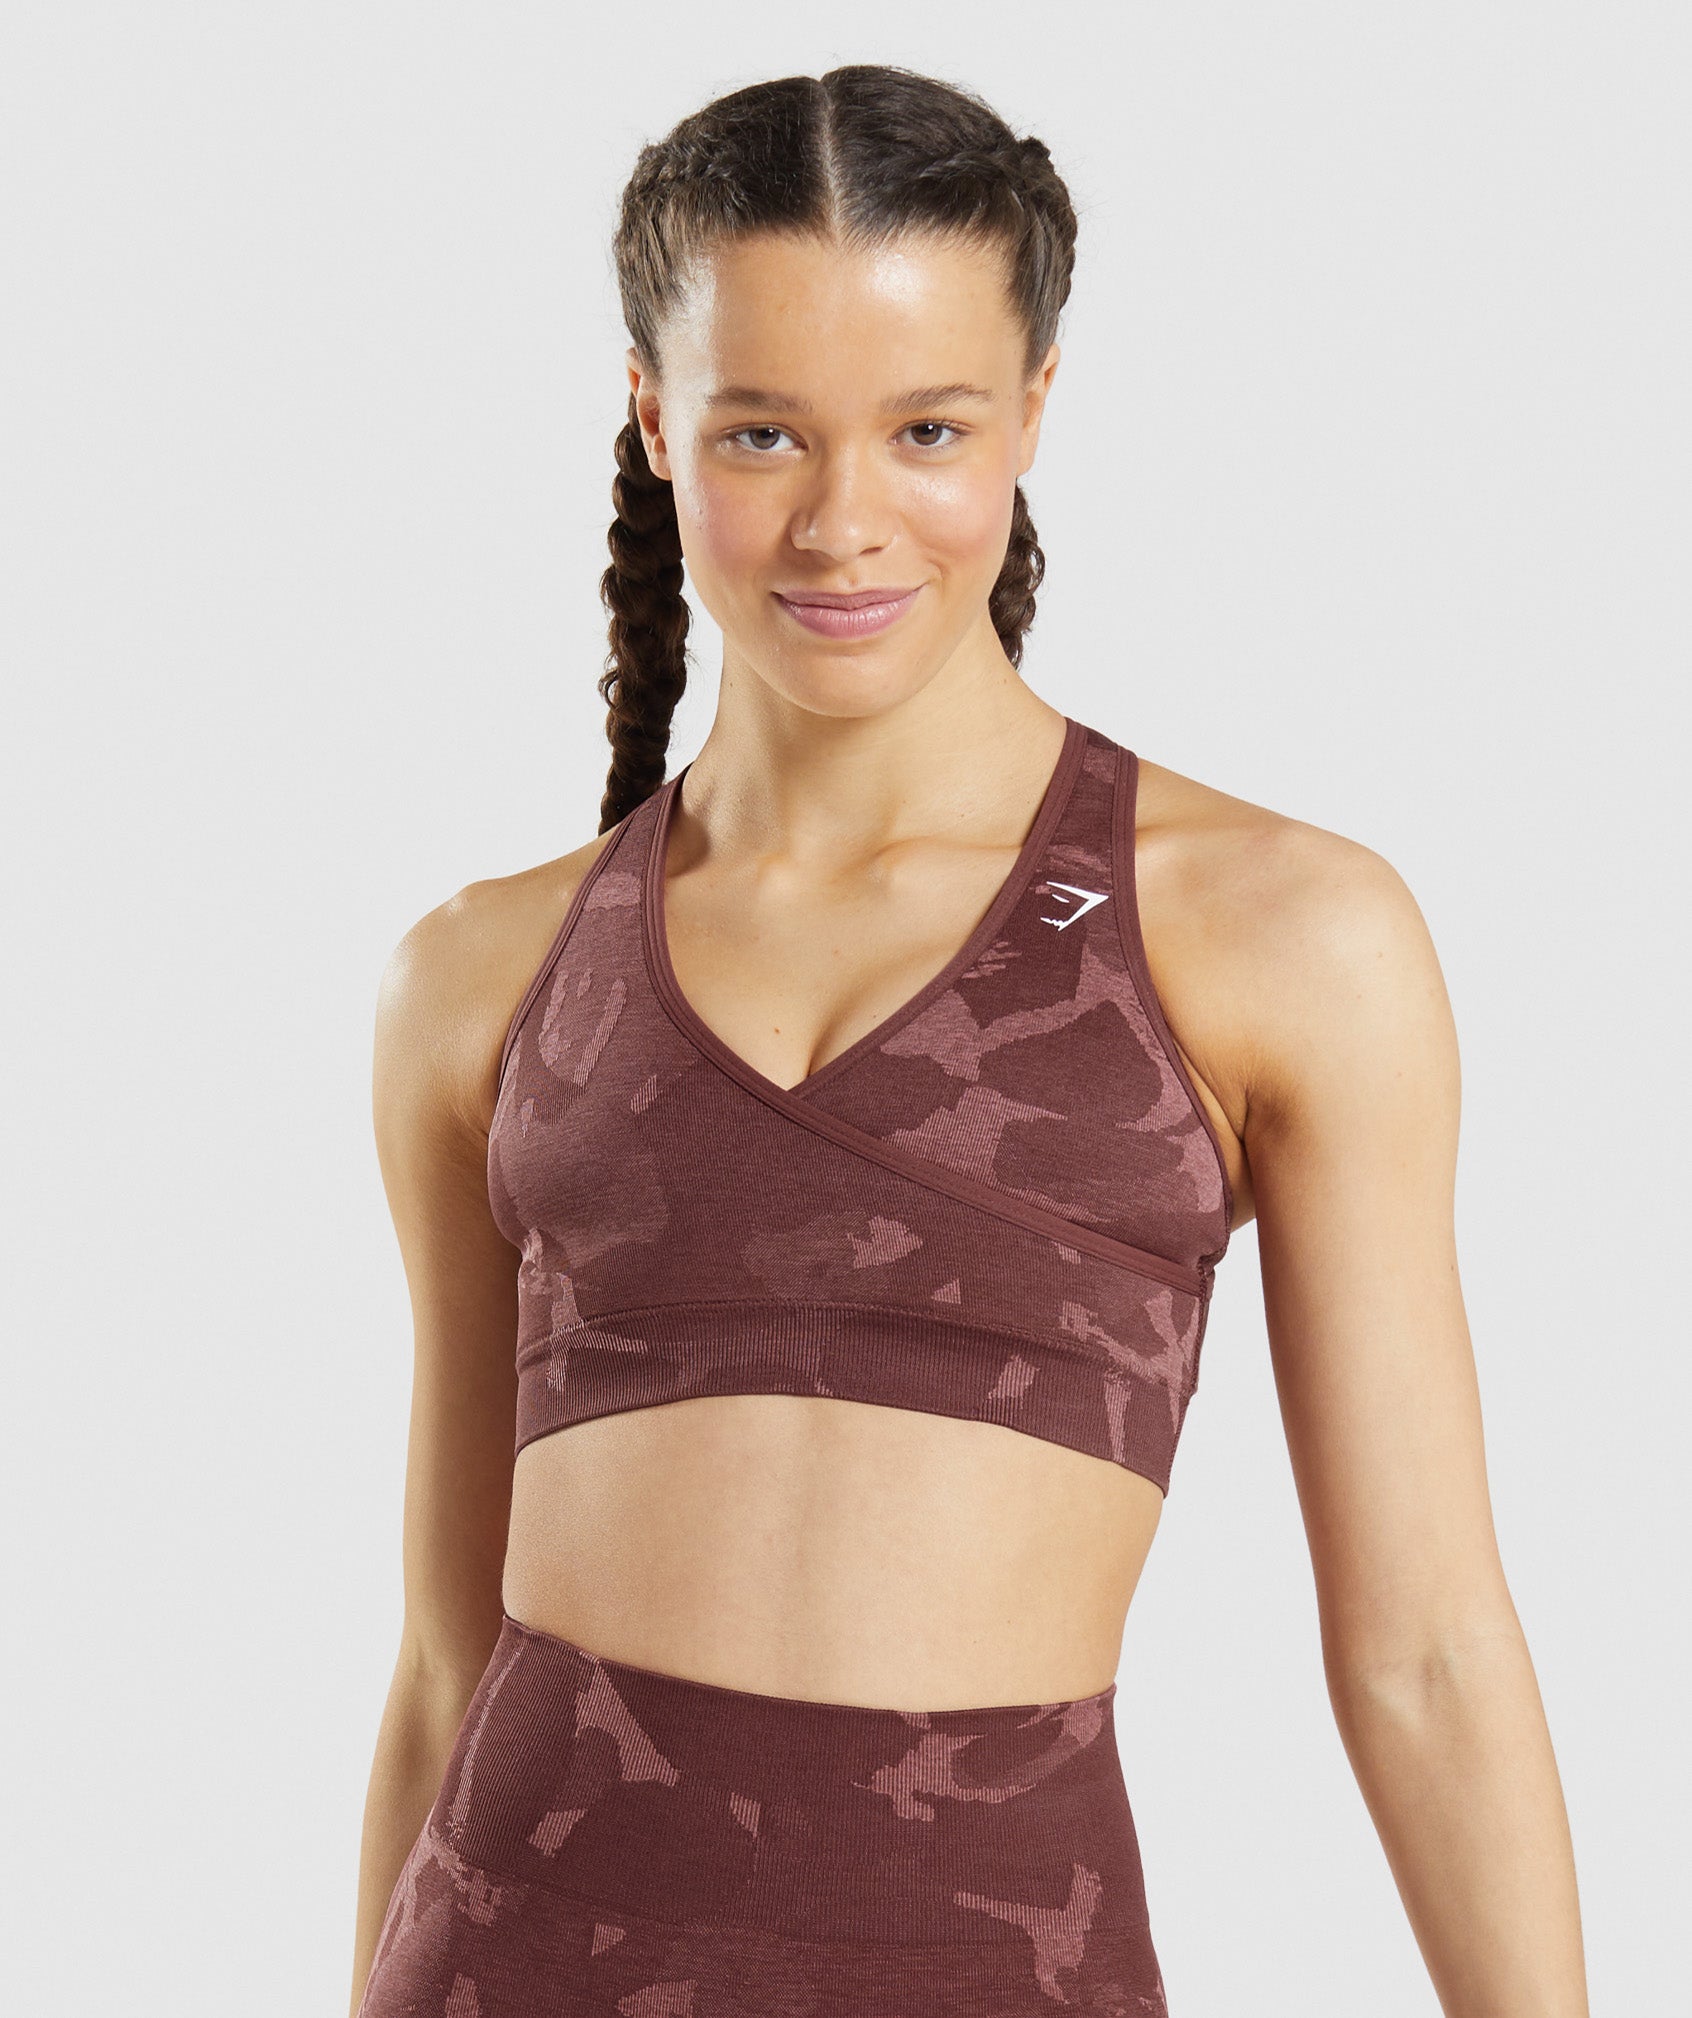 The taylor Camo Sports Bra, Spandex Shorts, and Optional Matching Cheer Bow  / I Am Ready / Dancewear / Matching Crop Top / Camouflage -  Canada